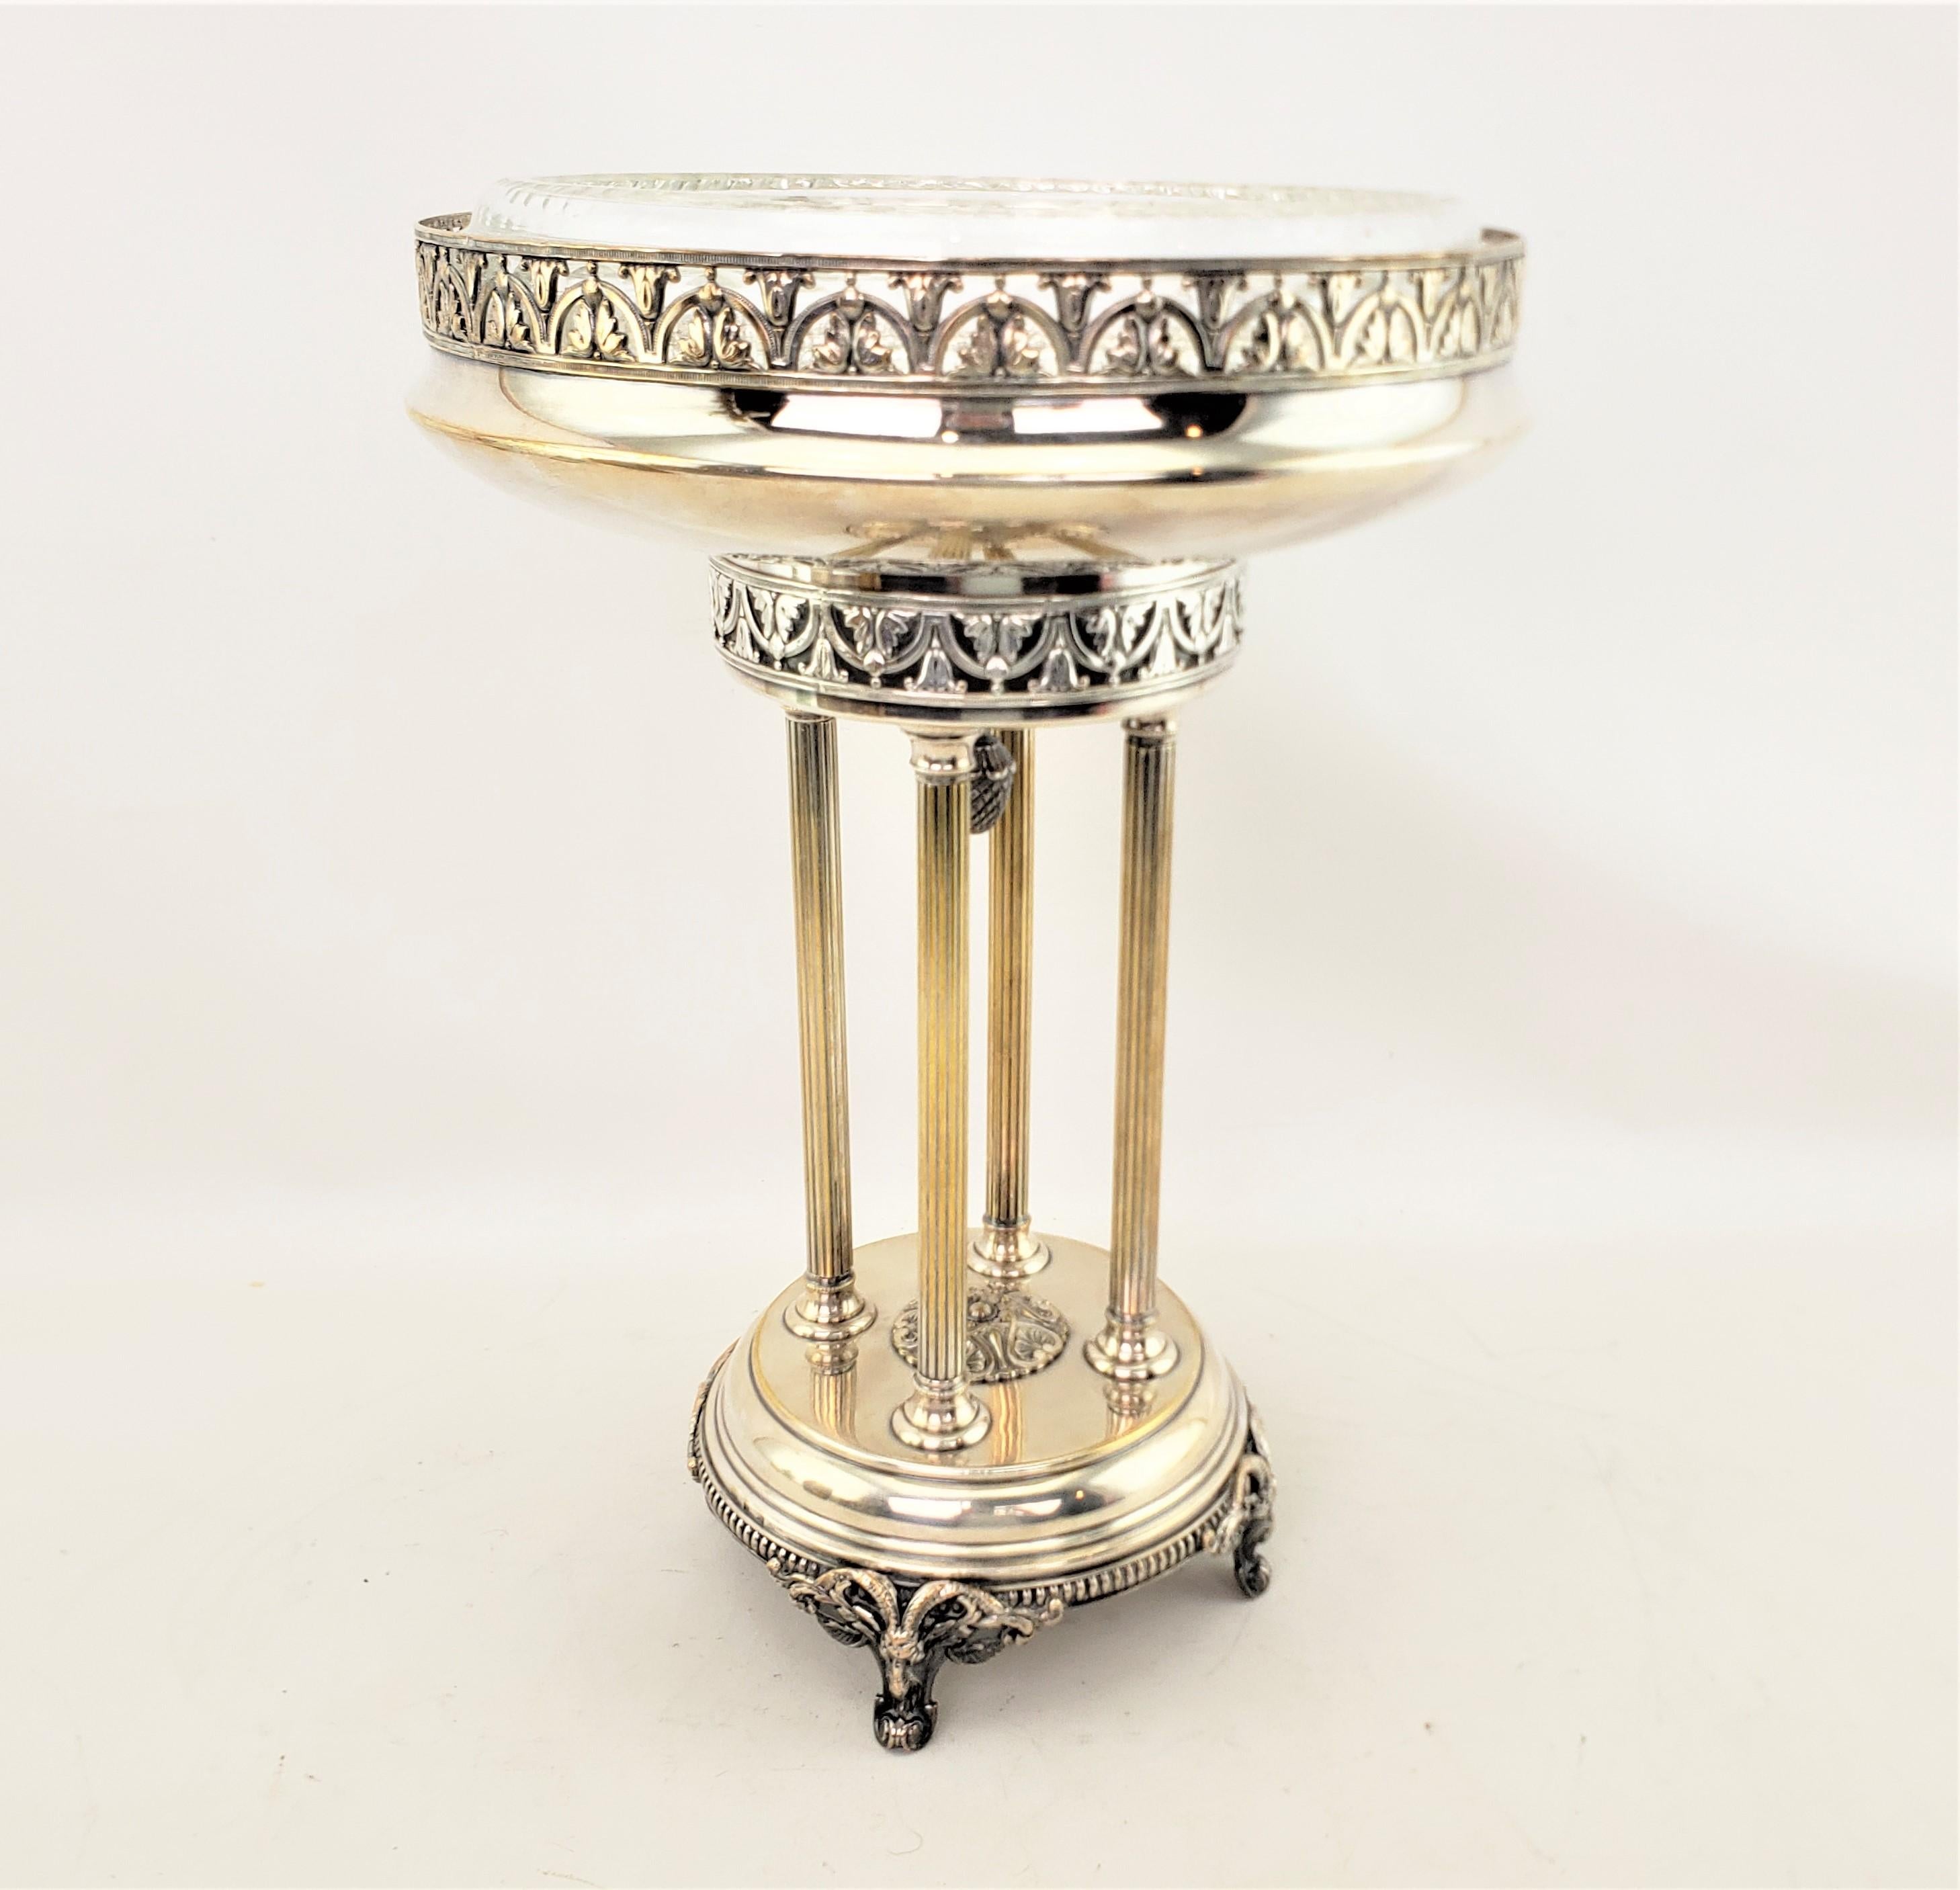 Machine-Made Antique Silver Plated Centerpiece in the Neoclassical Revival Style For Sale